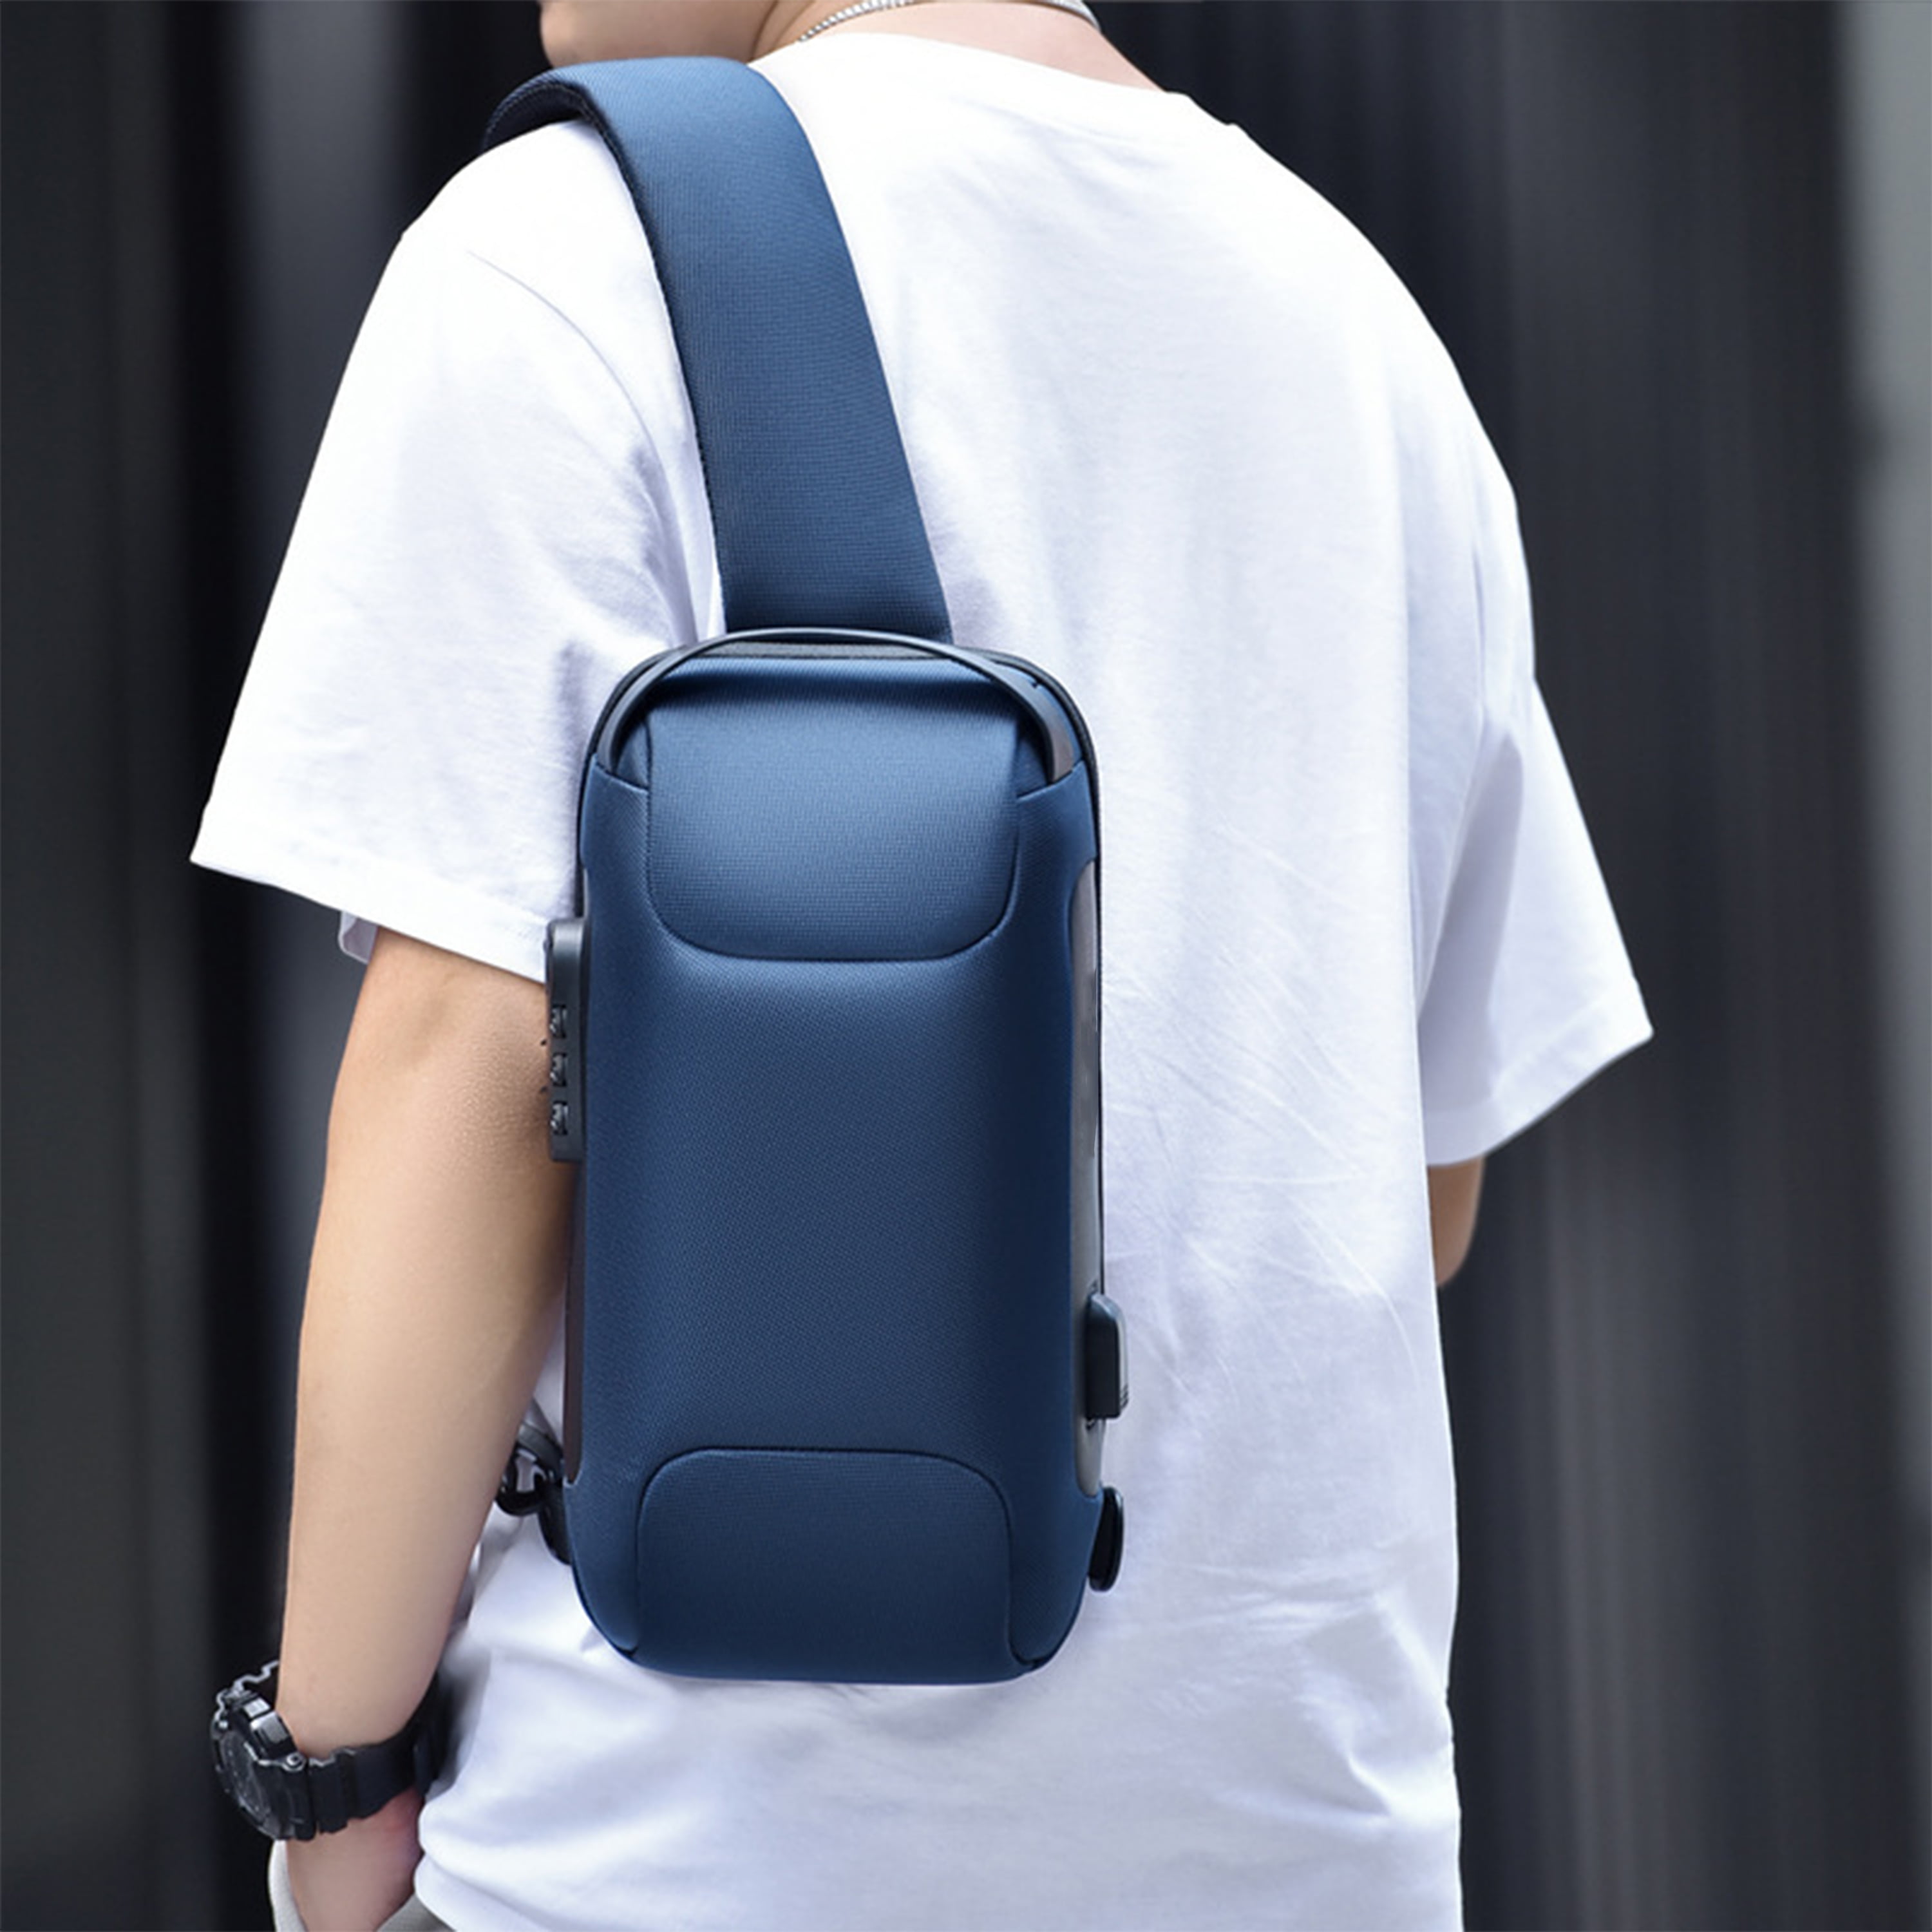 Buy Jafeton Sling Bag Small Backpack Men Waterproof Crossbody Bag Anti  Theft Chest Backpack Travel Shoulder Bag With Usb Charging Port Sling Pack  With Lock Nylon Water Resistant, Black, Small at